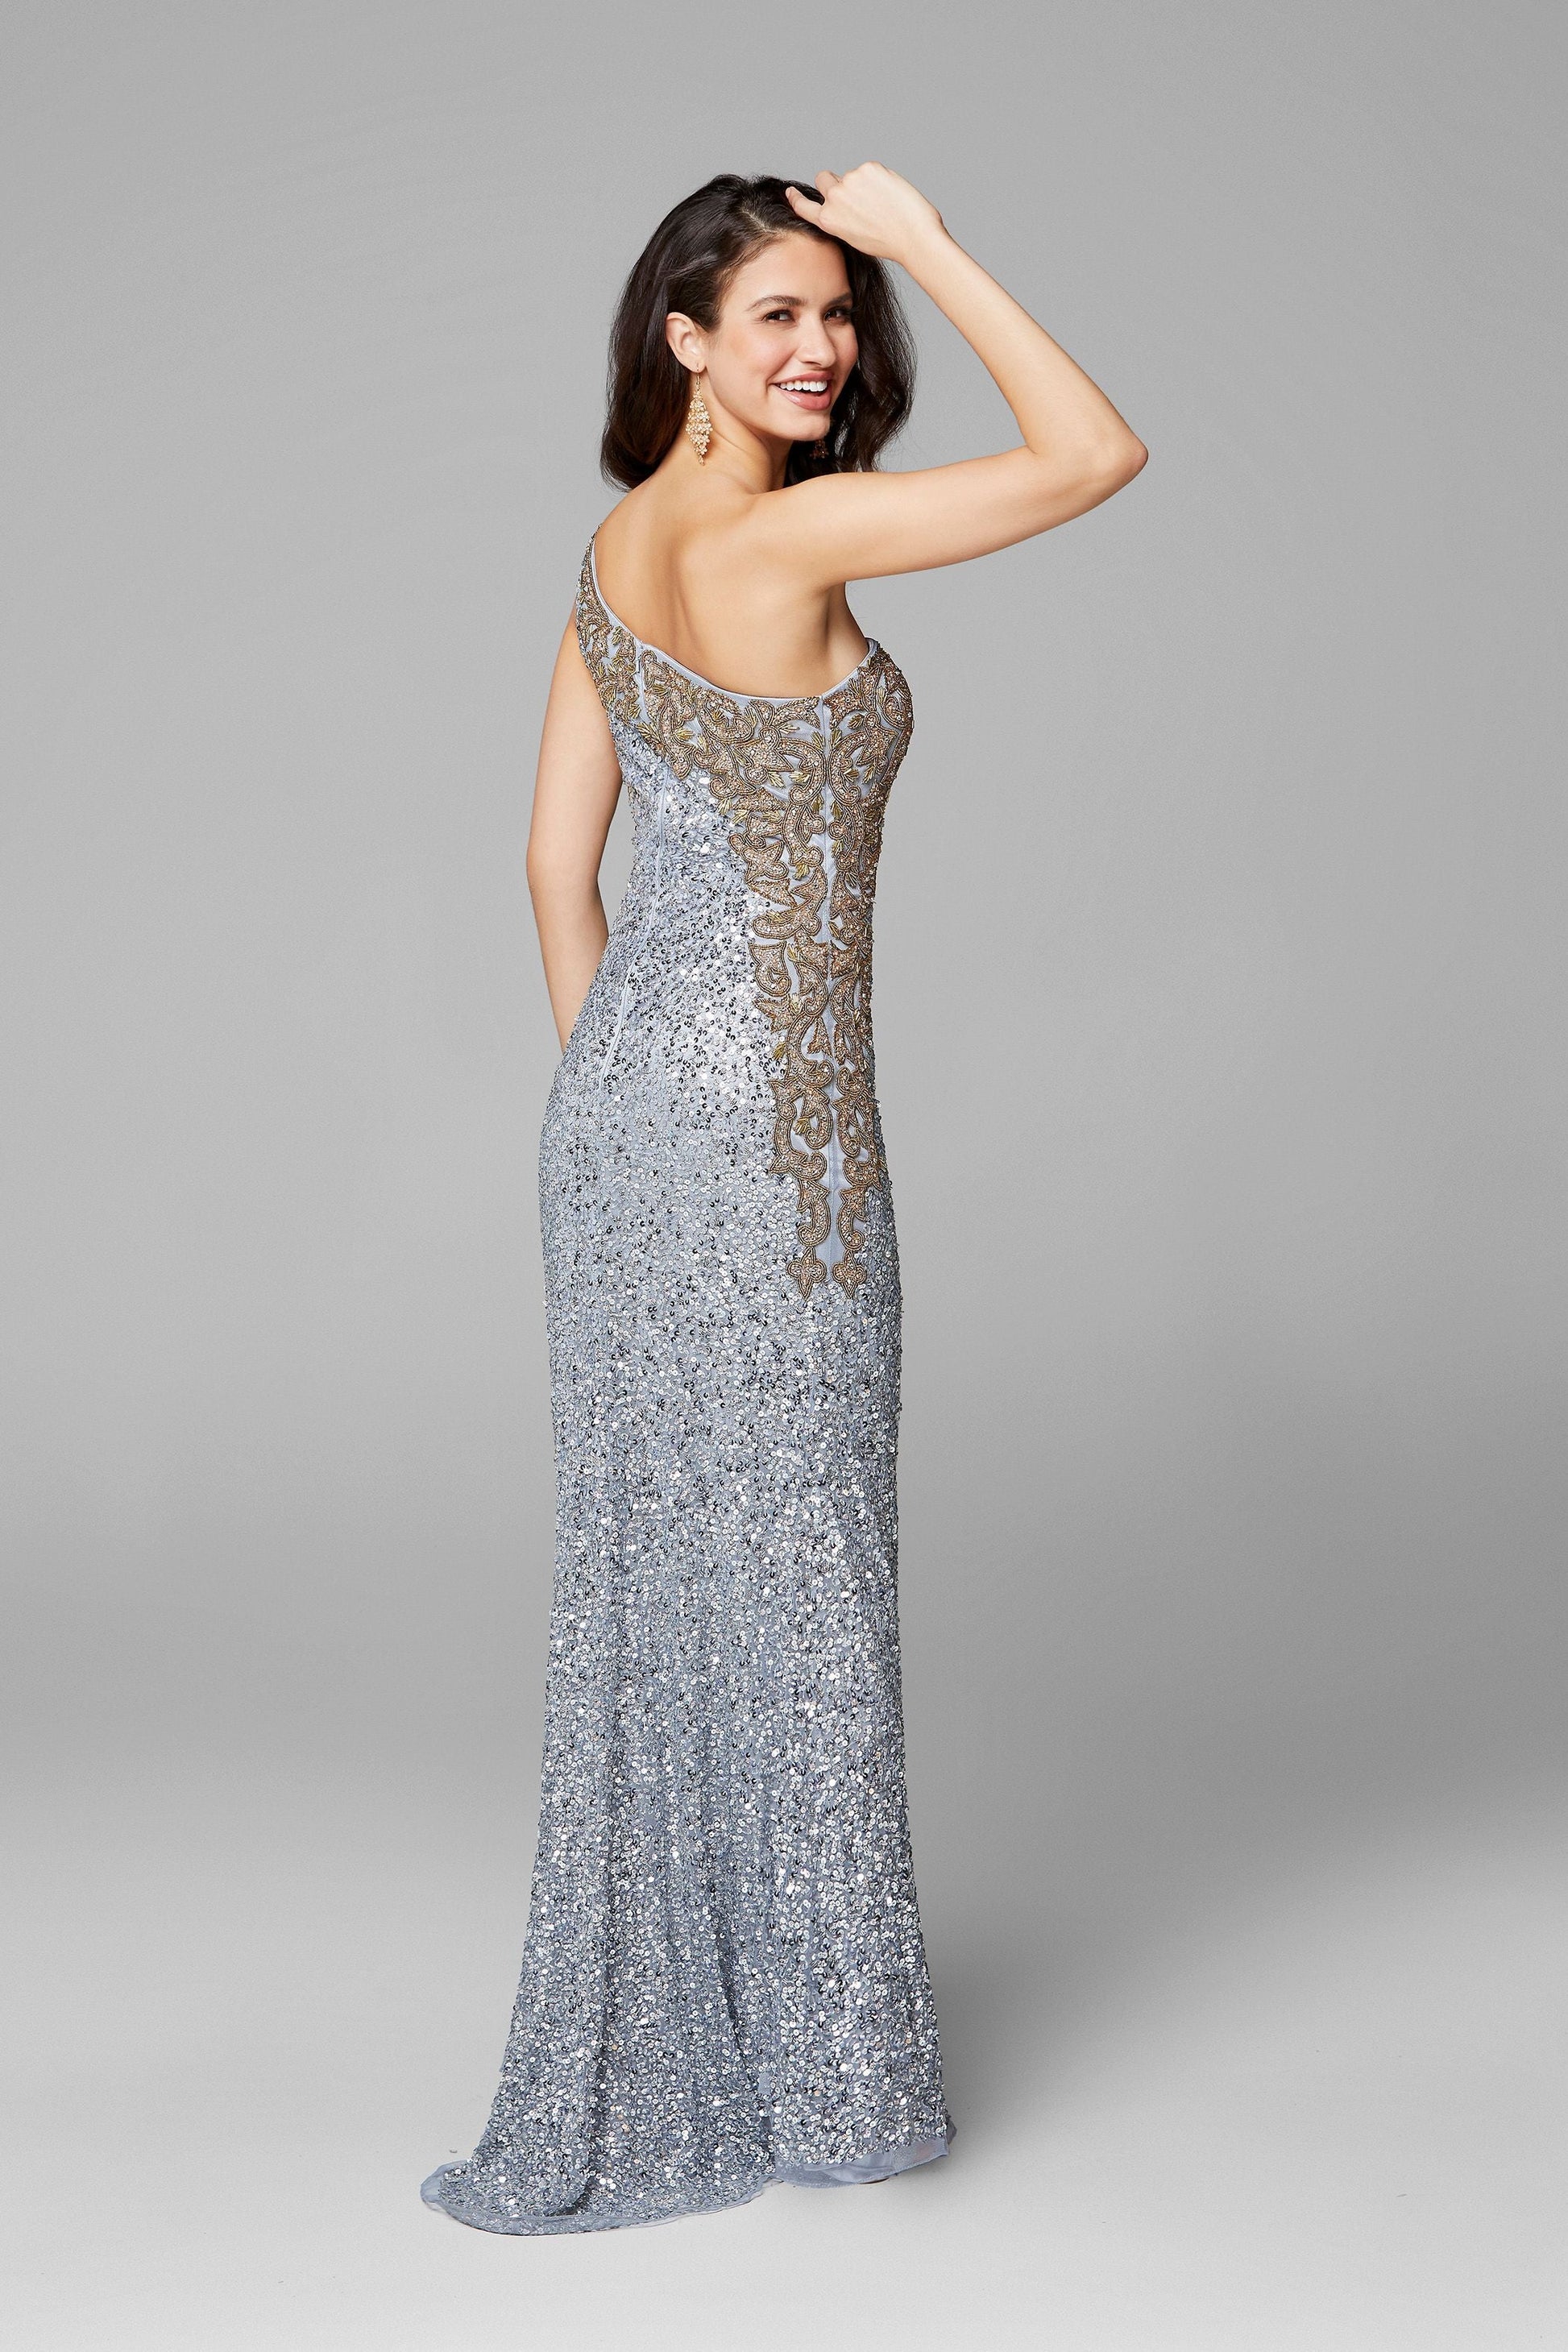 Primavera Couture 3637 is a stunning Long Fitted Sequin Embellished Formal Evening Gown. This One Shoulder Prom Dress Features Beaded Embellishments cascading from the one shoulder neckline down the side of the gown along the hip. Slit in skirt with a sweeping train. Great Pageant Formal Style.  Available Sizes: 00,0,2,4,6,8,10,12,14,16,18  Available Colors: Black, Platinum/Gold, Red